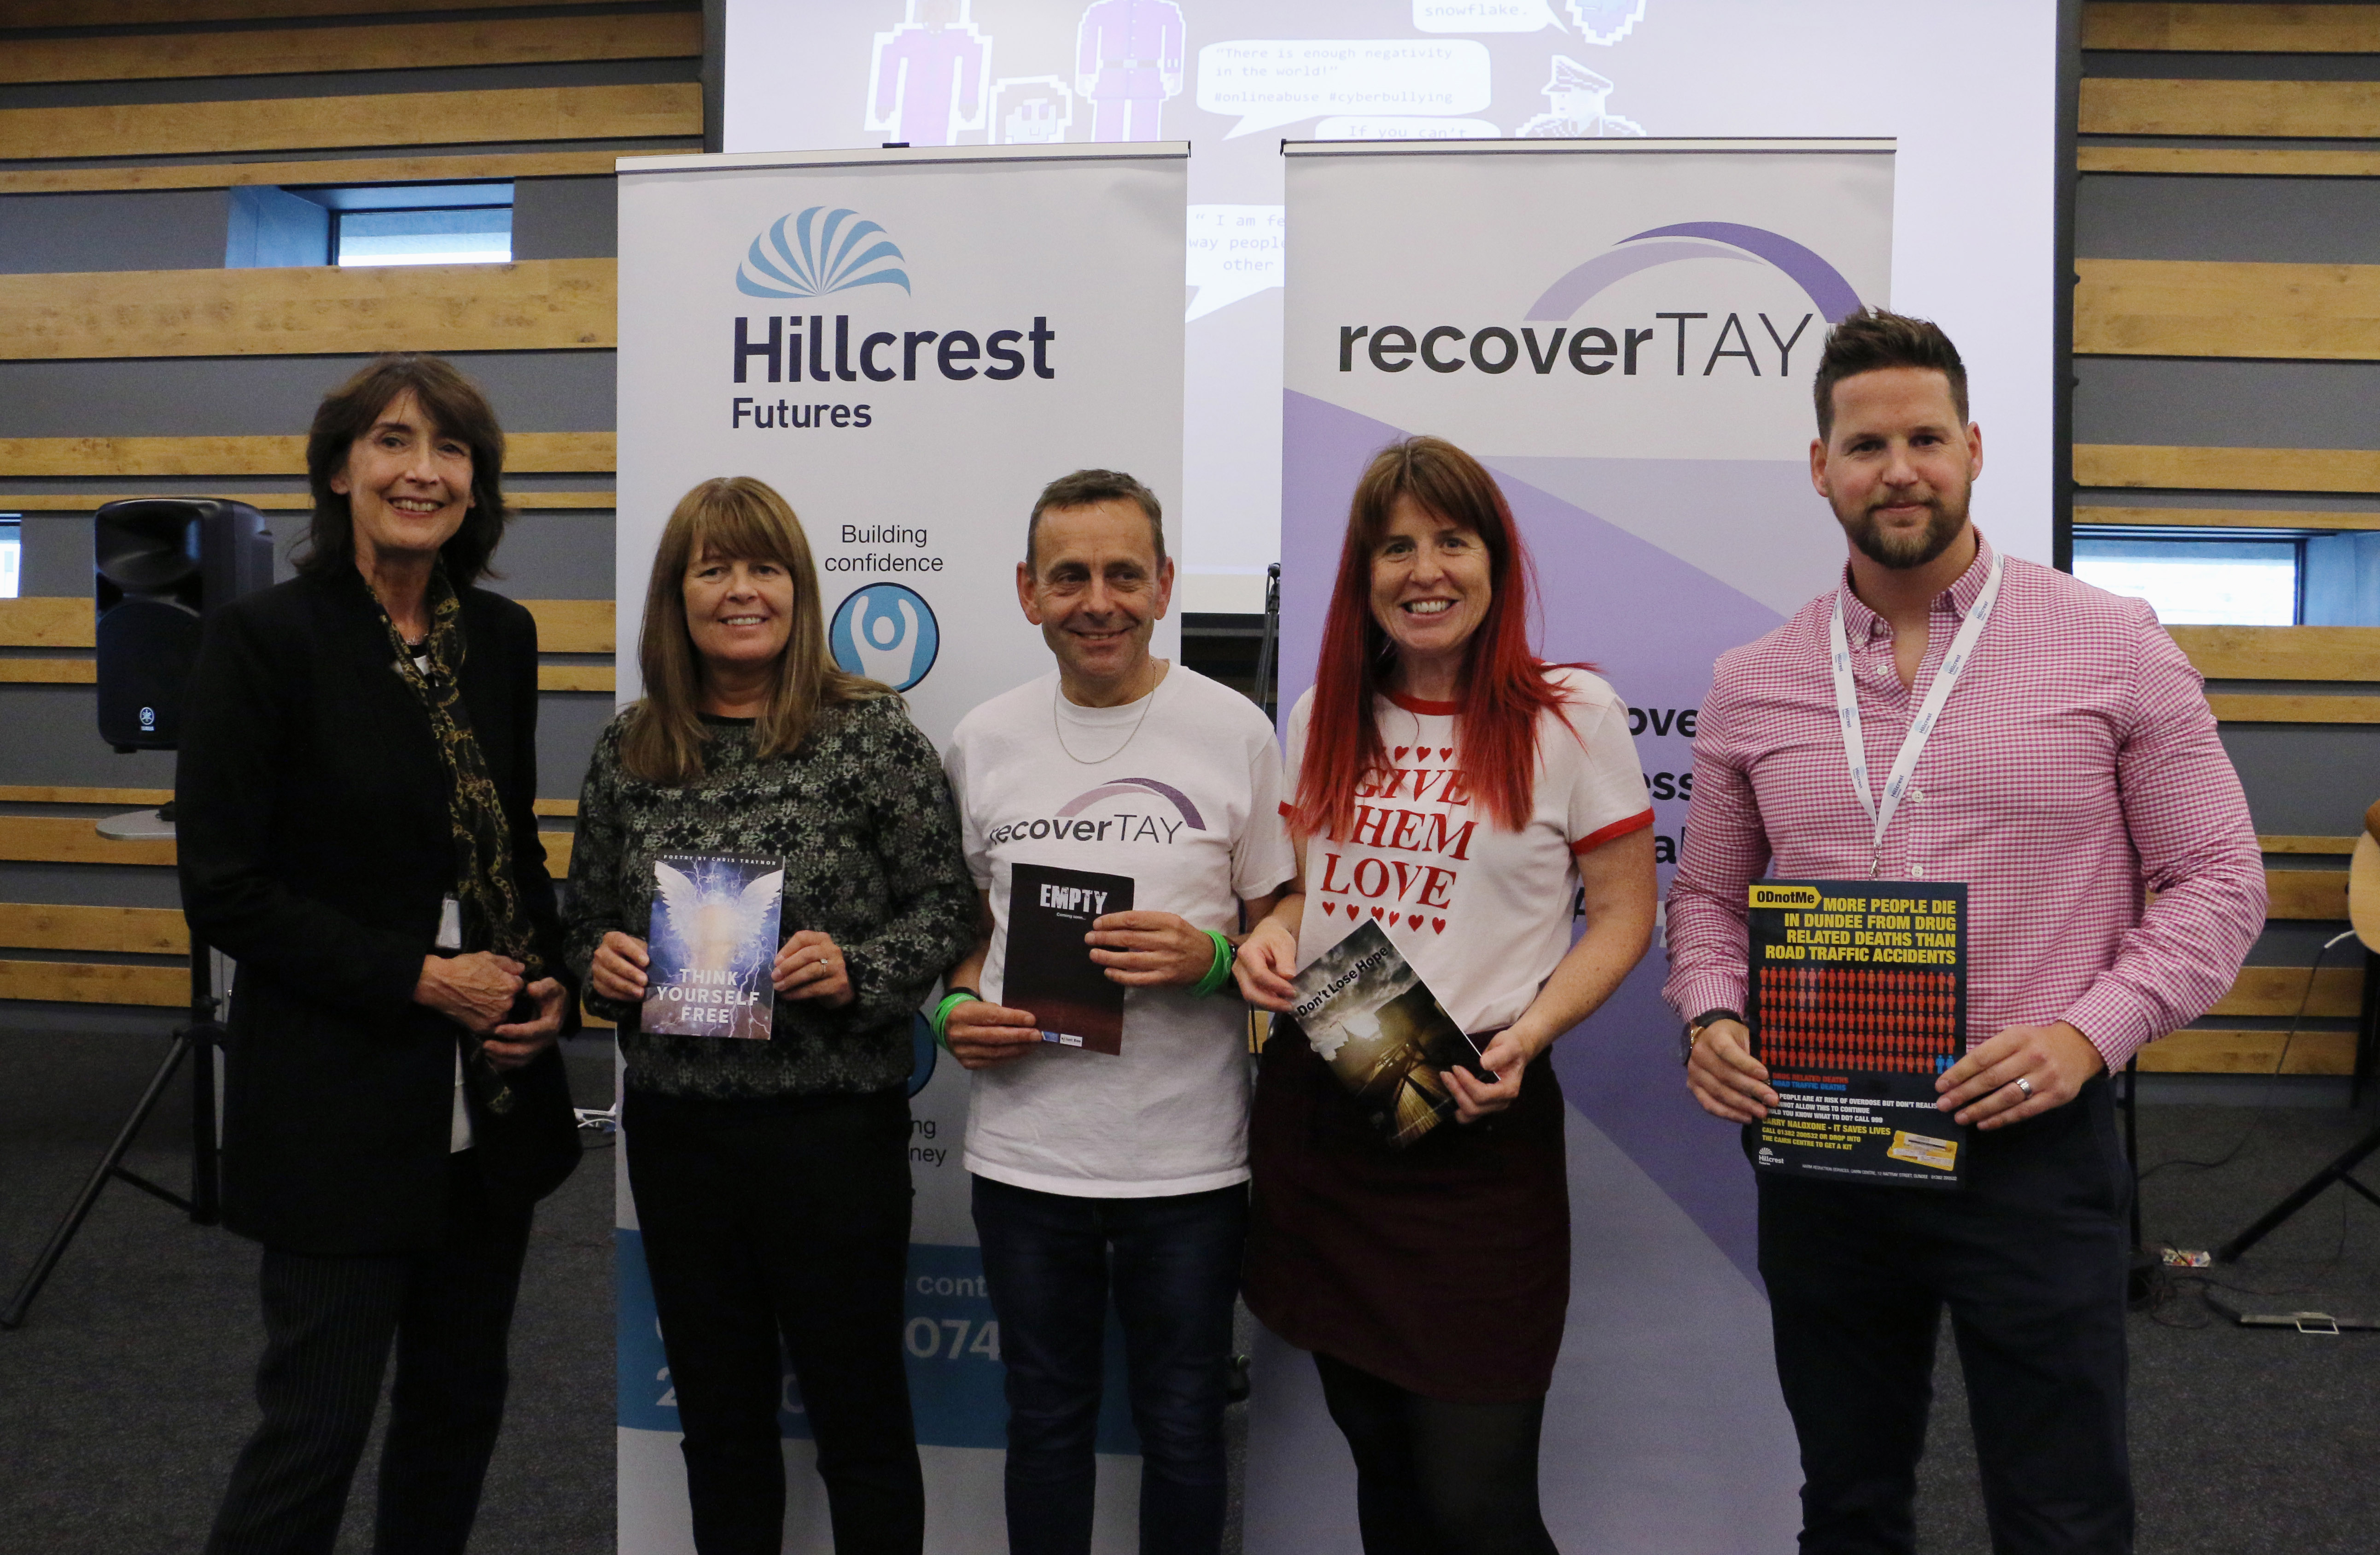 Hillcrest showcases positive side of drug and alcohol recovery